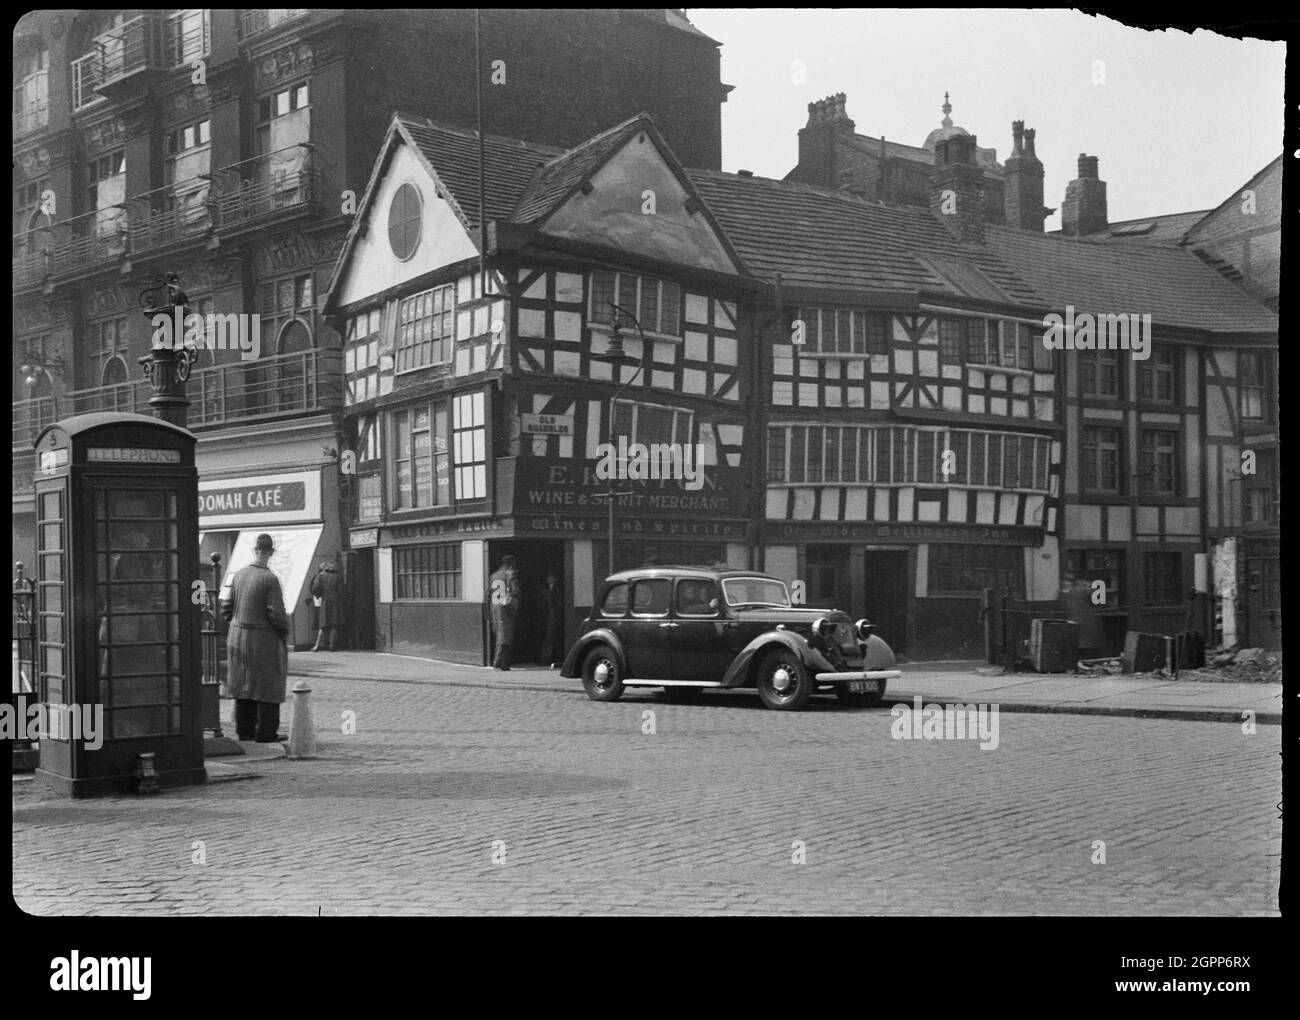 Old Wellington Inn, Old Shambles, Manchester, 1942. An exterior view of the Old Wellington Inn, showing the front facade in Old Shambles. The former house, now public house, dates to the mid 16th century, and was altered and raised by 30ft in the 1970s. It was moved c70m north to its current position, alongside Sinclairs Oyster Bar, in the mid to late 1990s, opening again in 1999. The inn has three storeys and a three bay plan, with the end bays gabled. There is a splayed door in the left corner, and a 20th century door in the centre of the south facade. The photo shows the inn in it's origina Stock Photo